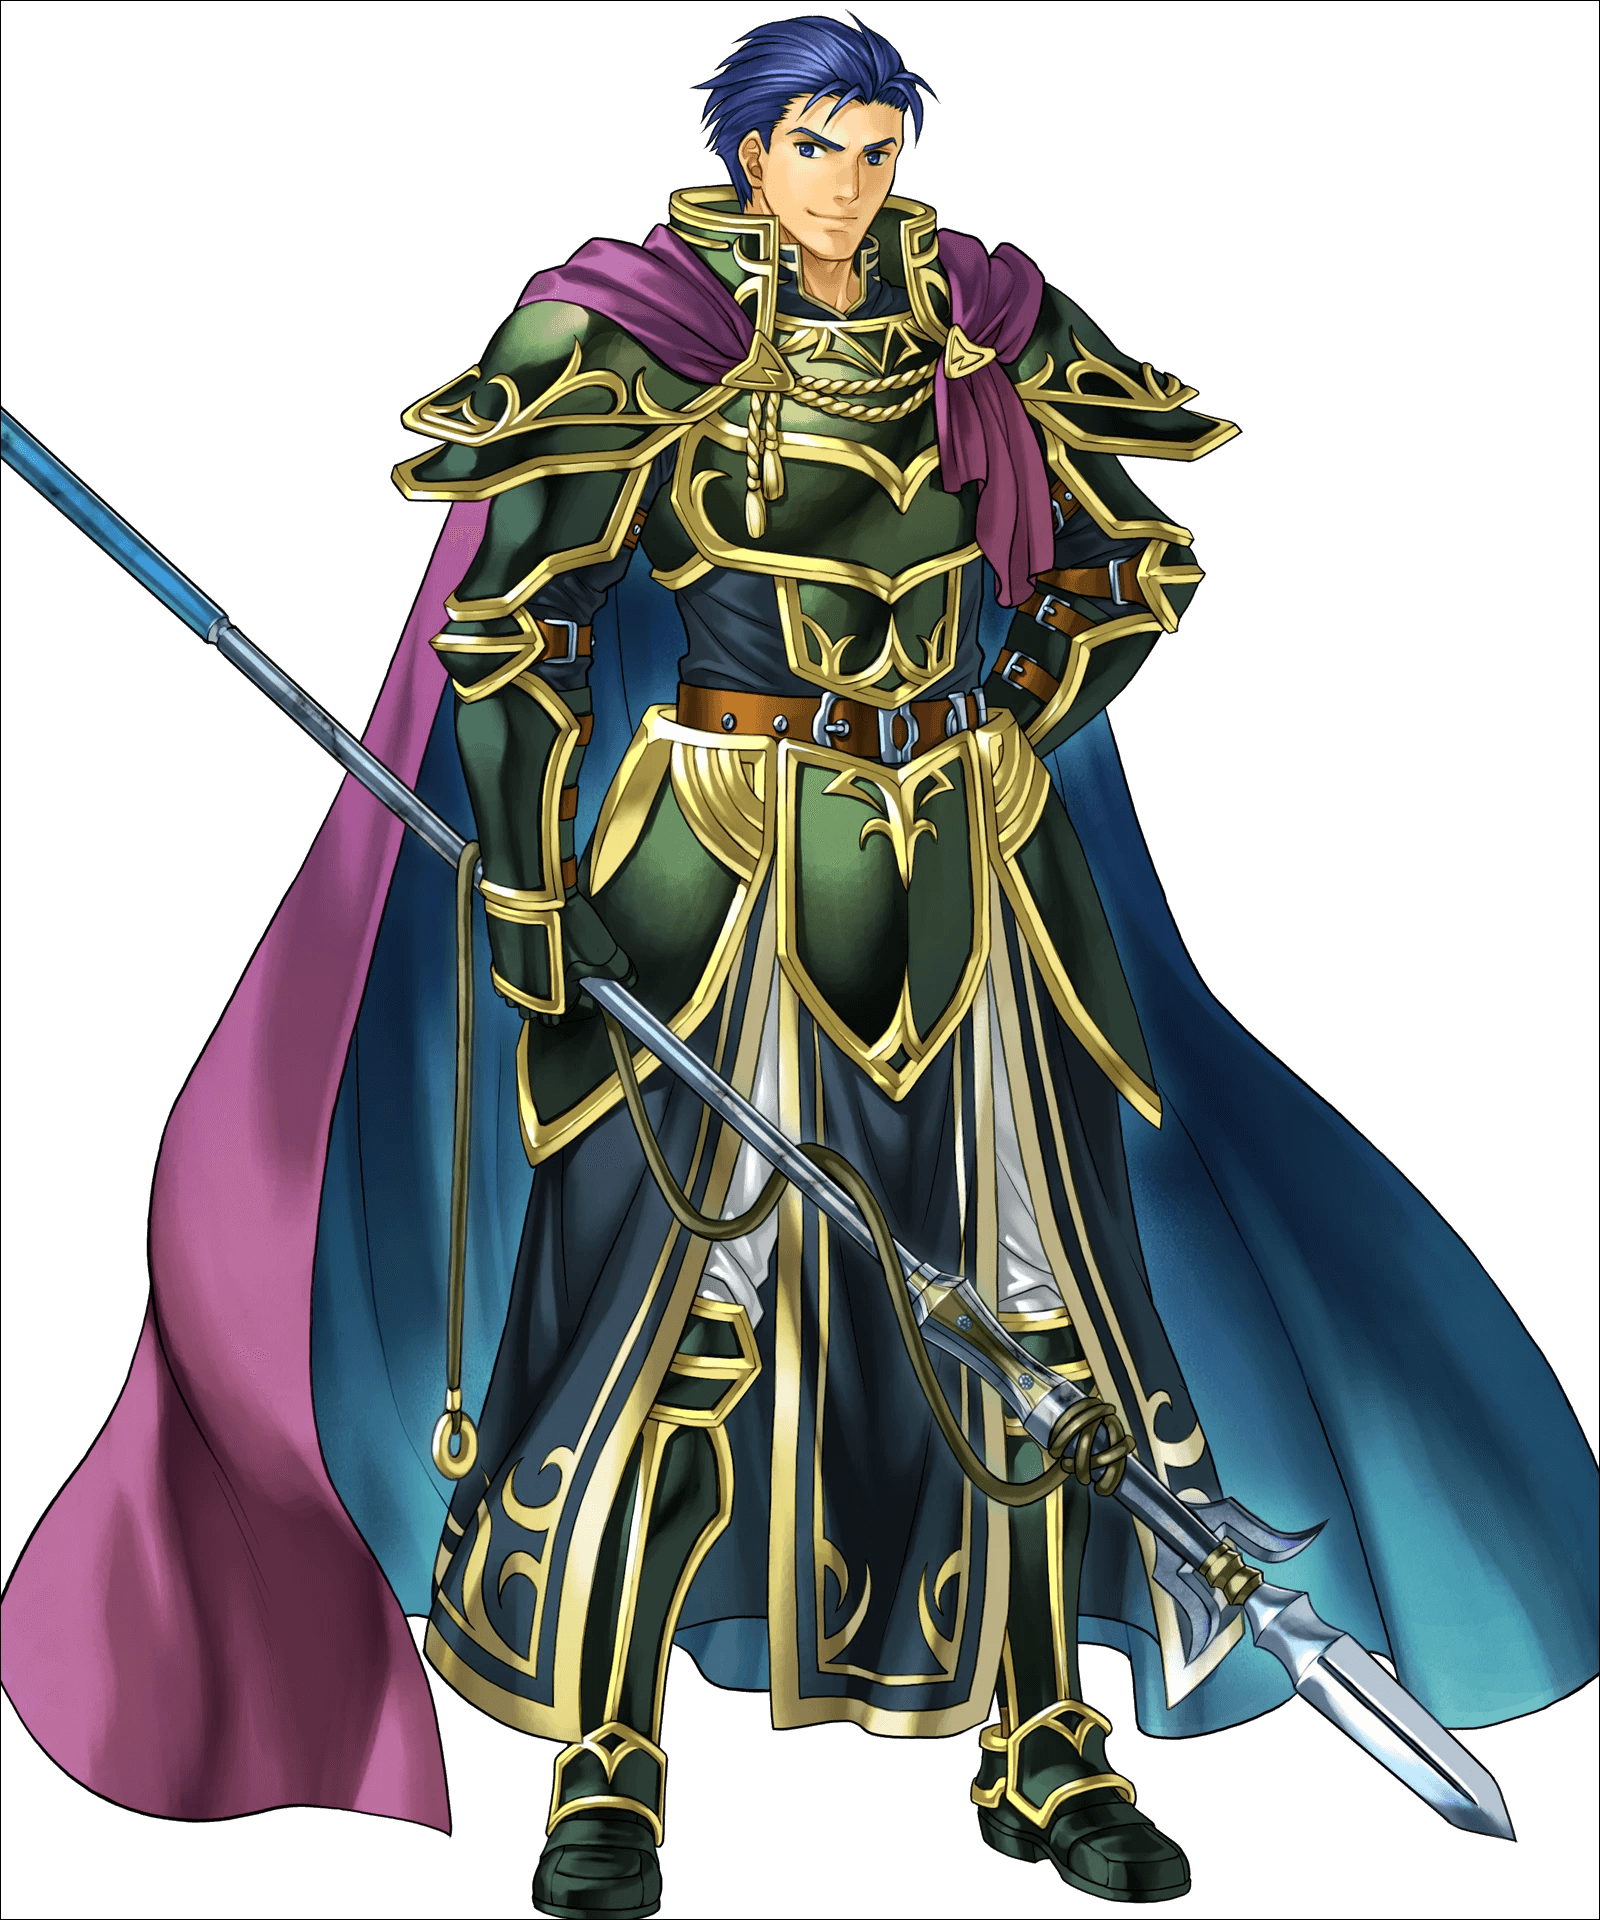 Brave Hector